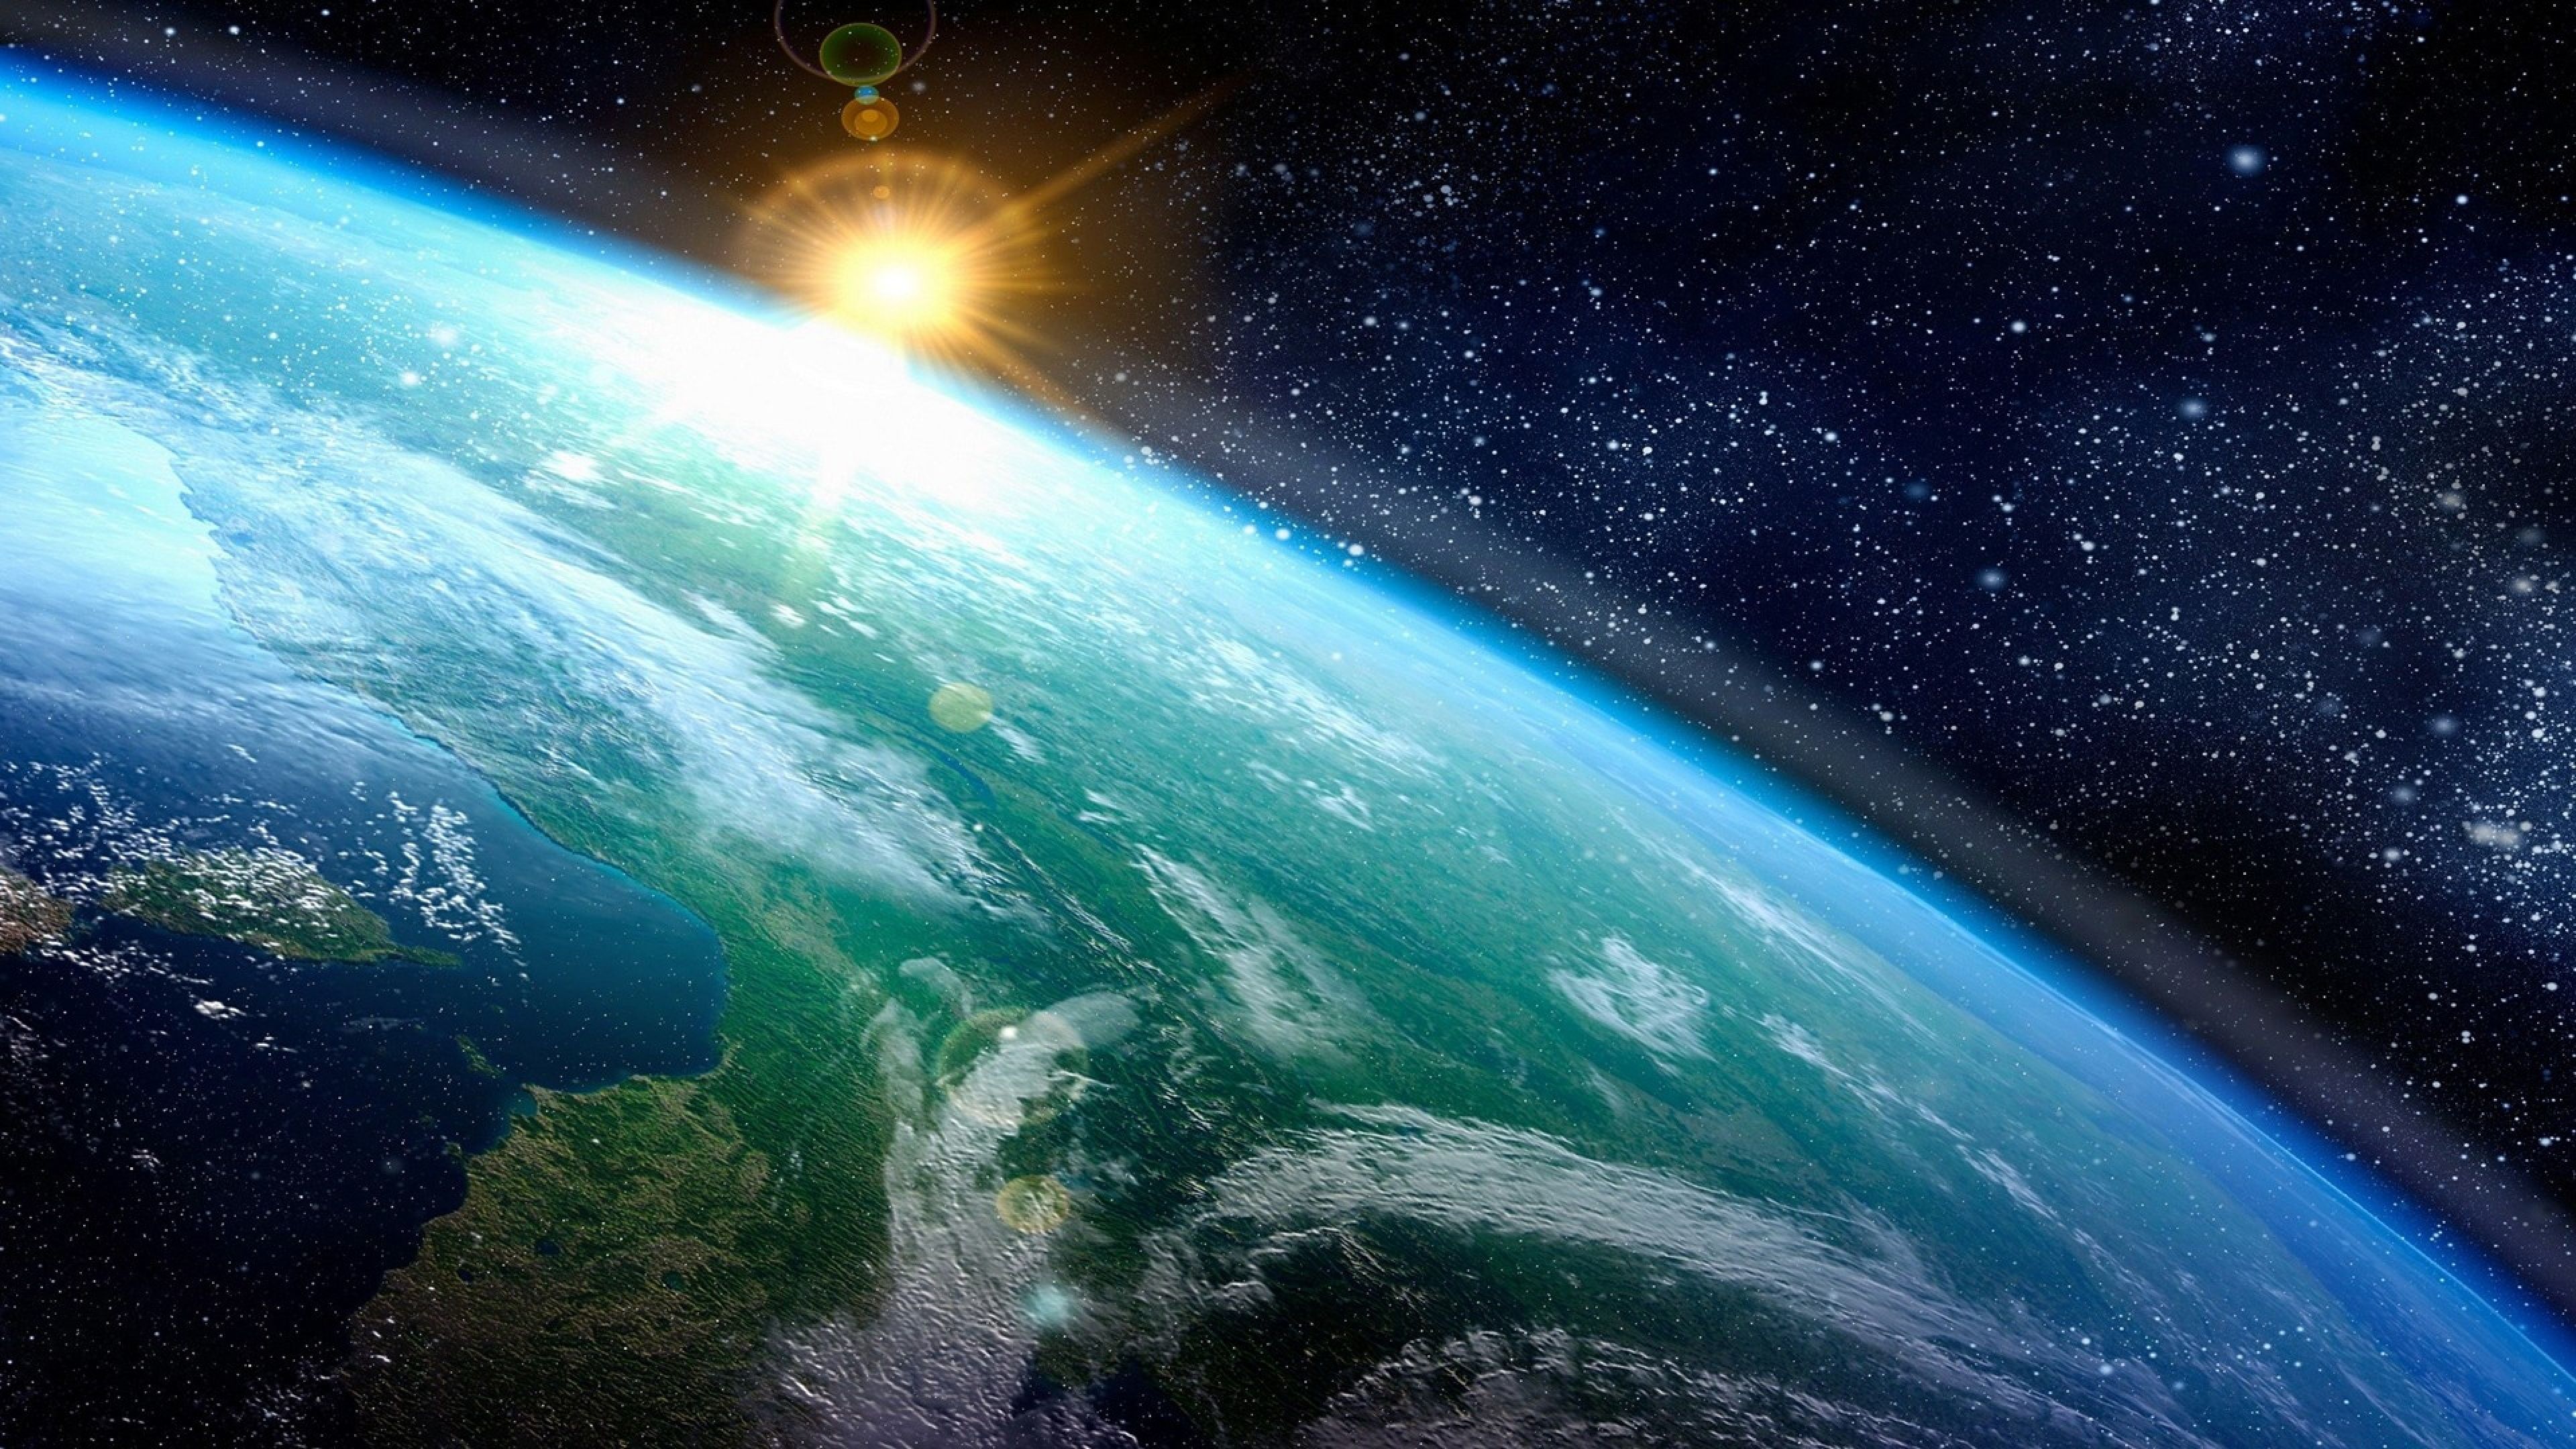 Windows 7 Ultimate HD wallpaper. Outer space wallpaper, Earth from space, Picture